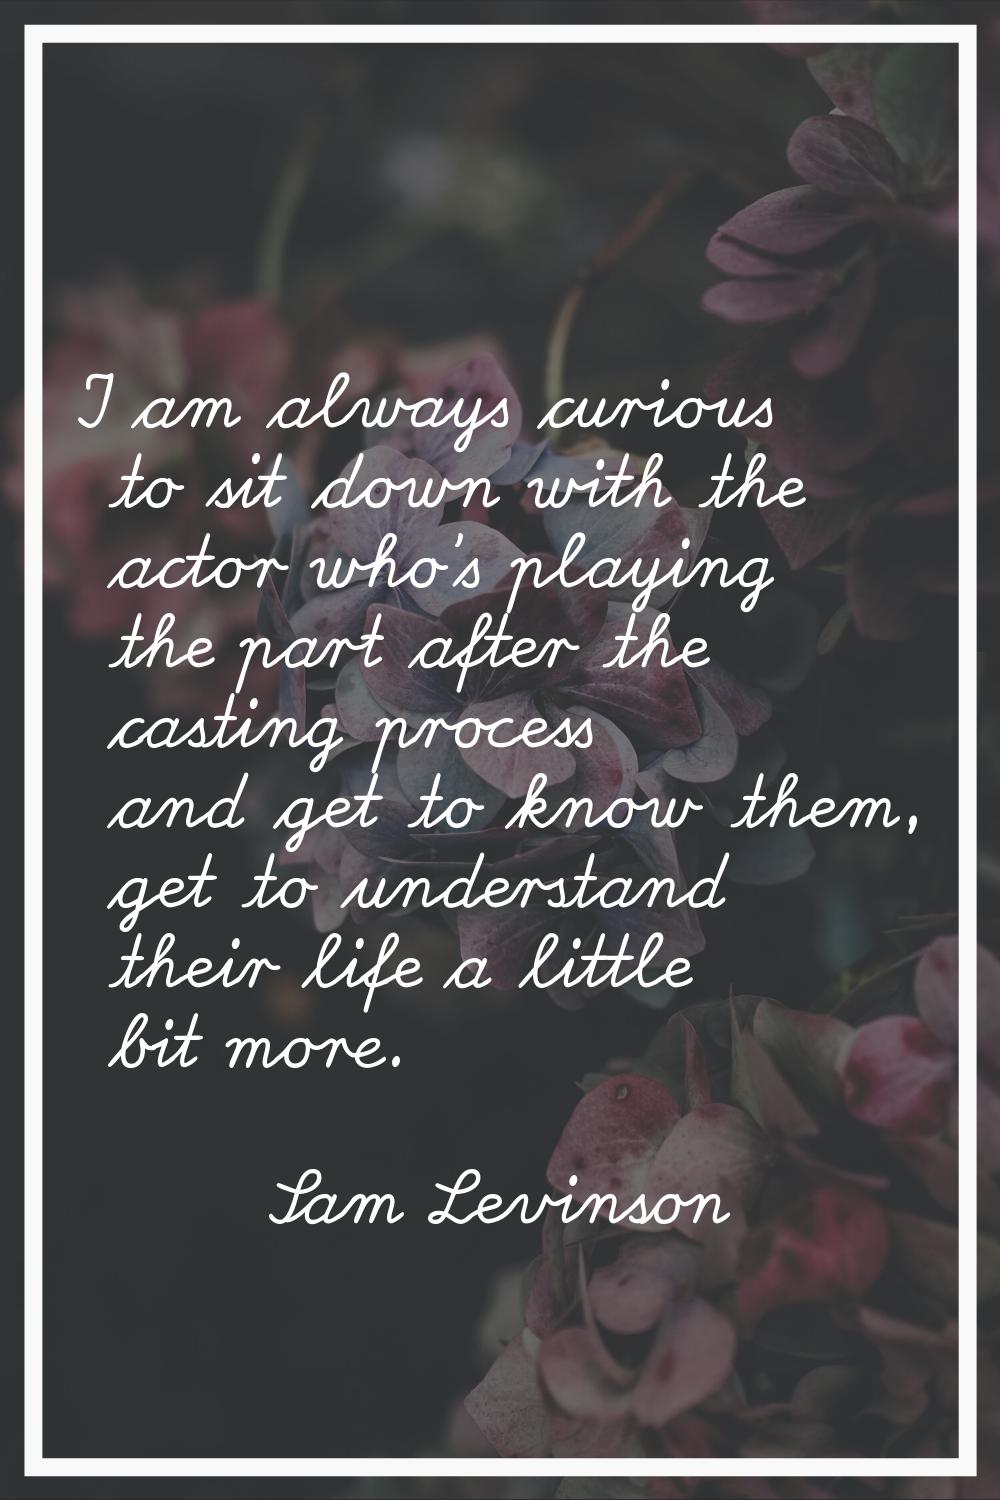 I am always curious to sit down with the actor who’s playing the part after the casting process and